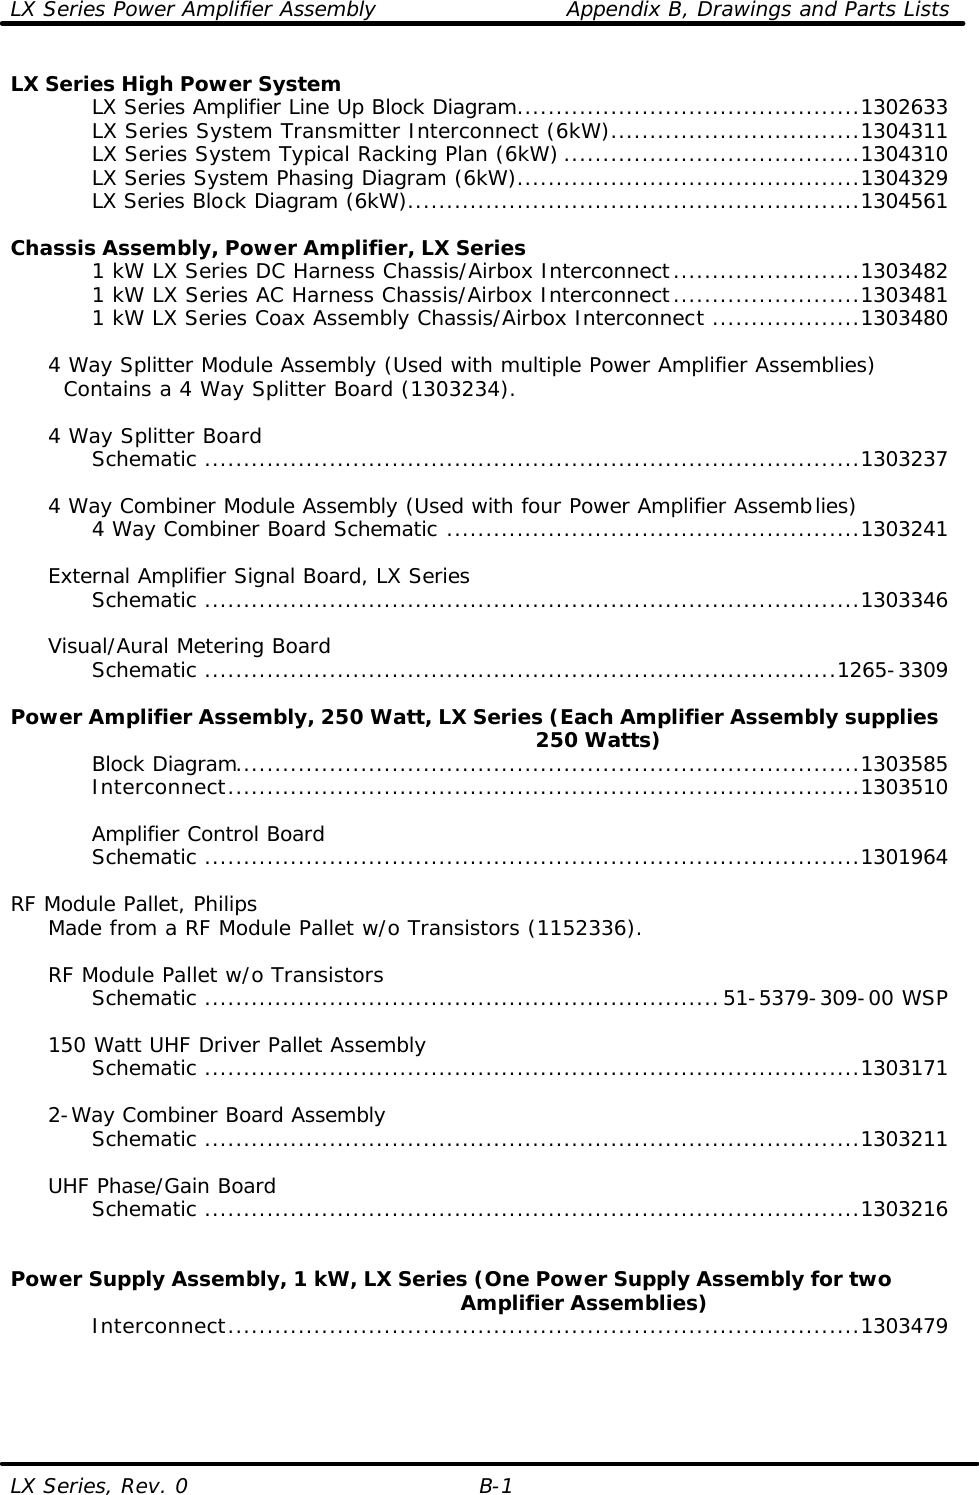 LX Series Power Amplifier Assembly    Appendix B, Drawings and Parts Lists LX Series, Rev. 0 B-1 LX Series High Power System     LX Series Amplifier Line Up Block Diagram............................................1302633     LX Series System Transmitter Interconnect (6kW)................................1304311     LX Series System Typical Racking Plan (6kW) ......................................1304310     LX Series System Phasing Diagram (6kW)............................................1304329     LX Series Block Diagram (6kW)..........................................................1304561  Chassis Assembly, Power Amplifier, LX Series     1 kW LX Series DC Harness Chassis/Airbox Interconnect........................1303482     1 kW LX Series AC Harness Chassis/Airbox Interconnect........................1303481     1 kW LX Series Coax Assembly Chassis/Airbox Interconnect...................1303480       4 Way Splitter Module Assembly (Used with multiple Power Amplifier Assemblies)    Contains a 4 Way Splitter Board (1303234).     4 Way Splitter Board     Schematic ....................................................................................1303237       4 Way Combiner Module Assembly (Used with four Power Amplifier Assemblies)     4 Way Combiner Board Schematic .....................................................1303241       External Amplifier Signal Board, LX Series     Schematic ....................................................................................1303346       Visual/Aural Metering Board     Schematic .................................................................................1265-3309      Power Amplifier Assembly, 250 Watt, LX Series (Each Amplifier Assembly supplies                                                                            250 Watts)     Block Diagram................................................................................1303585     Interconnect.................................................................................1303510          Amplifier Control Board     Schematic ....................................................................................1301964      RF Module Pallet, Philips  Made from a RF Module Pallet w/o Transistors (1152336).       RF Module Pallet w/o Transistors     Schematic ..................................................................51-5379-309-00 WSP       150 Watt UHF Driver Pallet Assembly     Schematic ....................................................................................1303171       2-Way Combiner Board Assembly     Schematic ....................................................................................1303211       UHF Phase/Gain Board     Schematic ....................................................................................1303216       Power Supply Assembly, 1 kW, LX Series (One Power Supply Assembly for two                                                                Amplifier Assemblies)     Interconnect.................................................................................1303479 